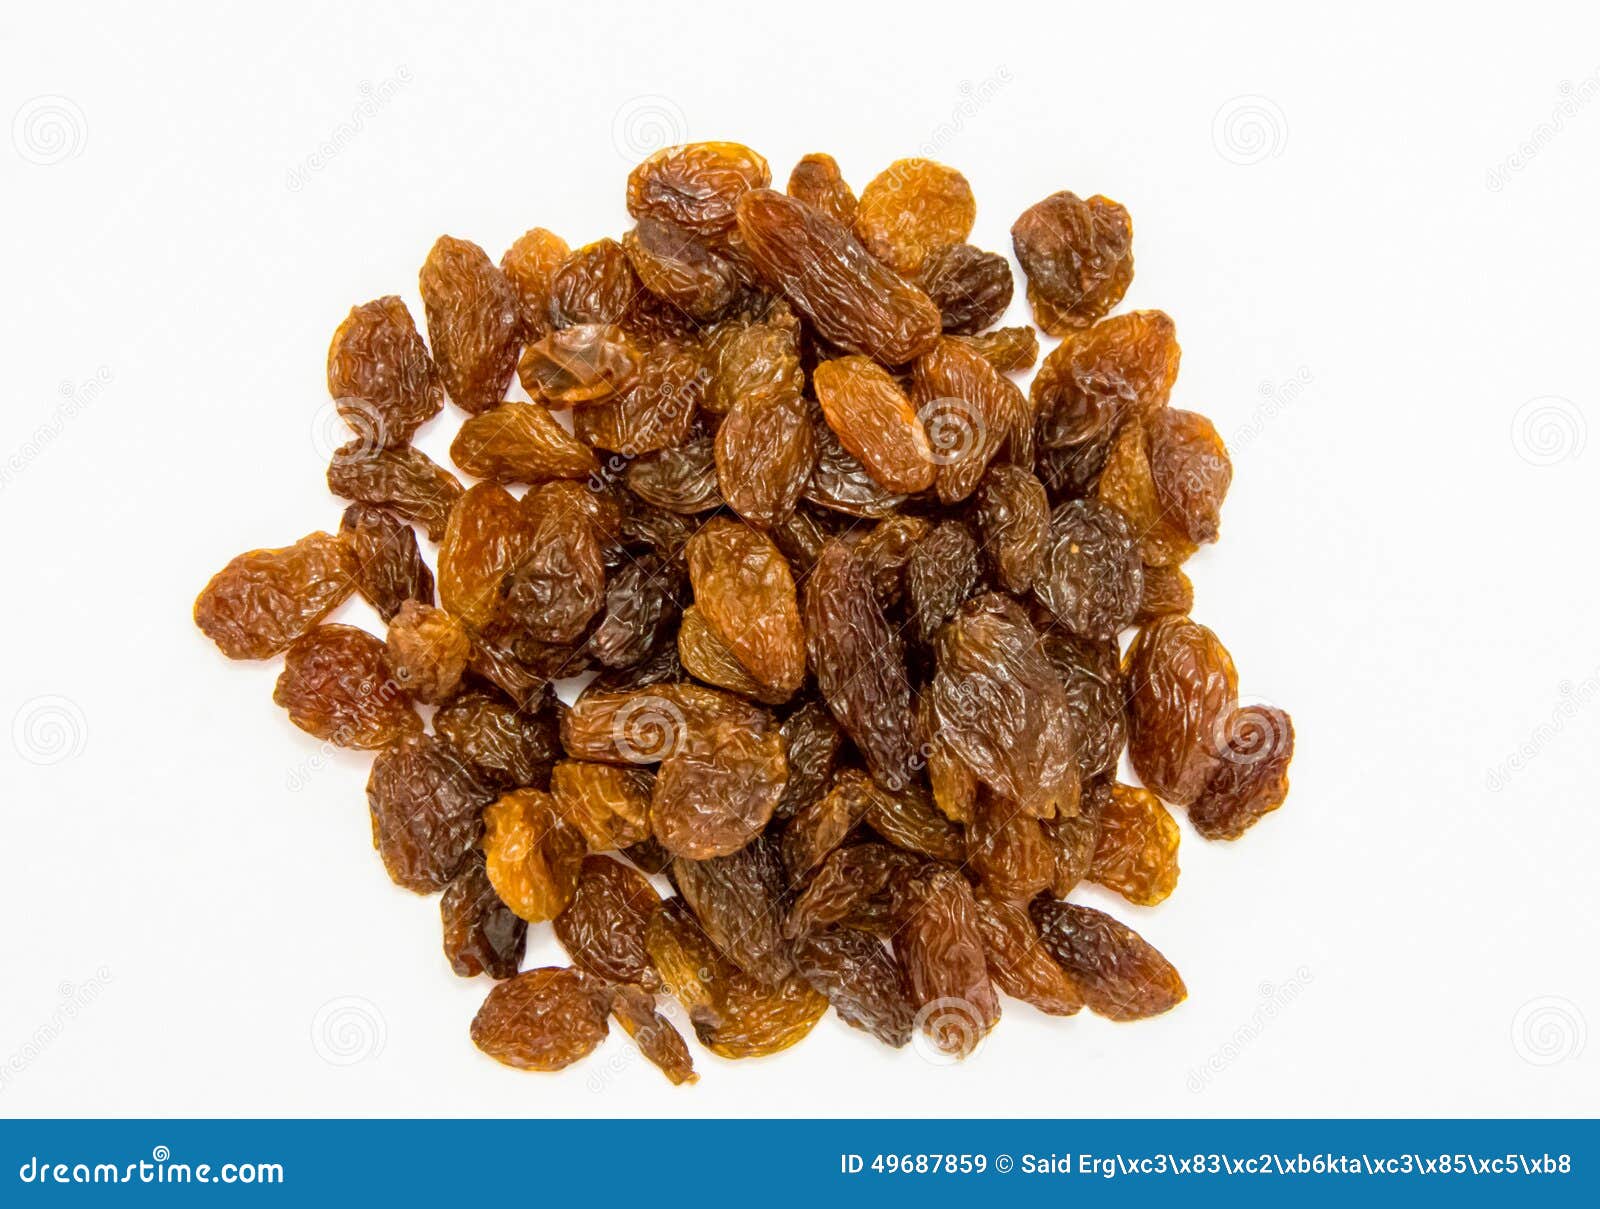 Dried Grapes stock image. Image of background, fruit - 49687859